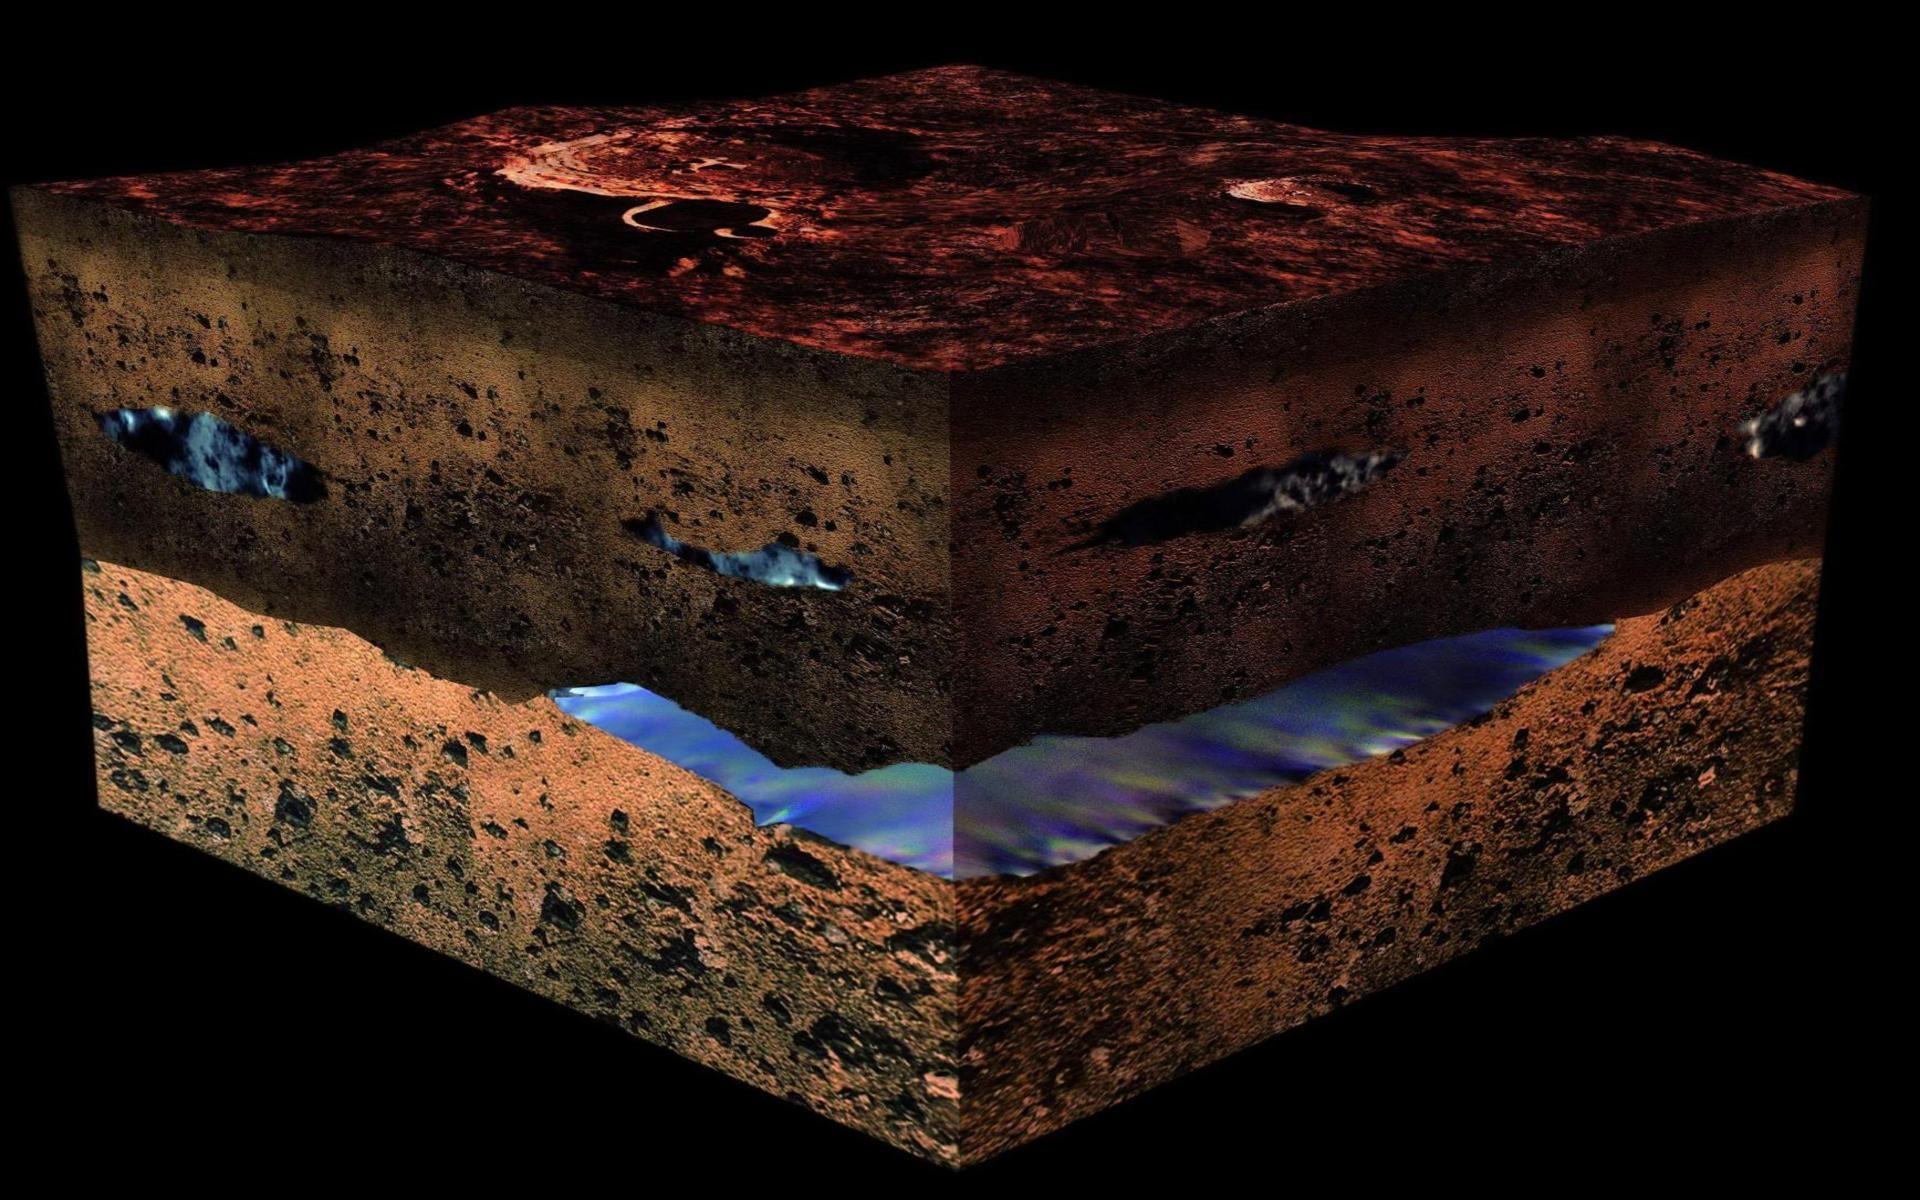 Water under the martian surface geology science testing method